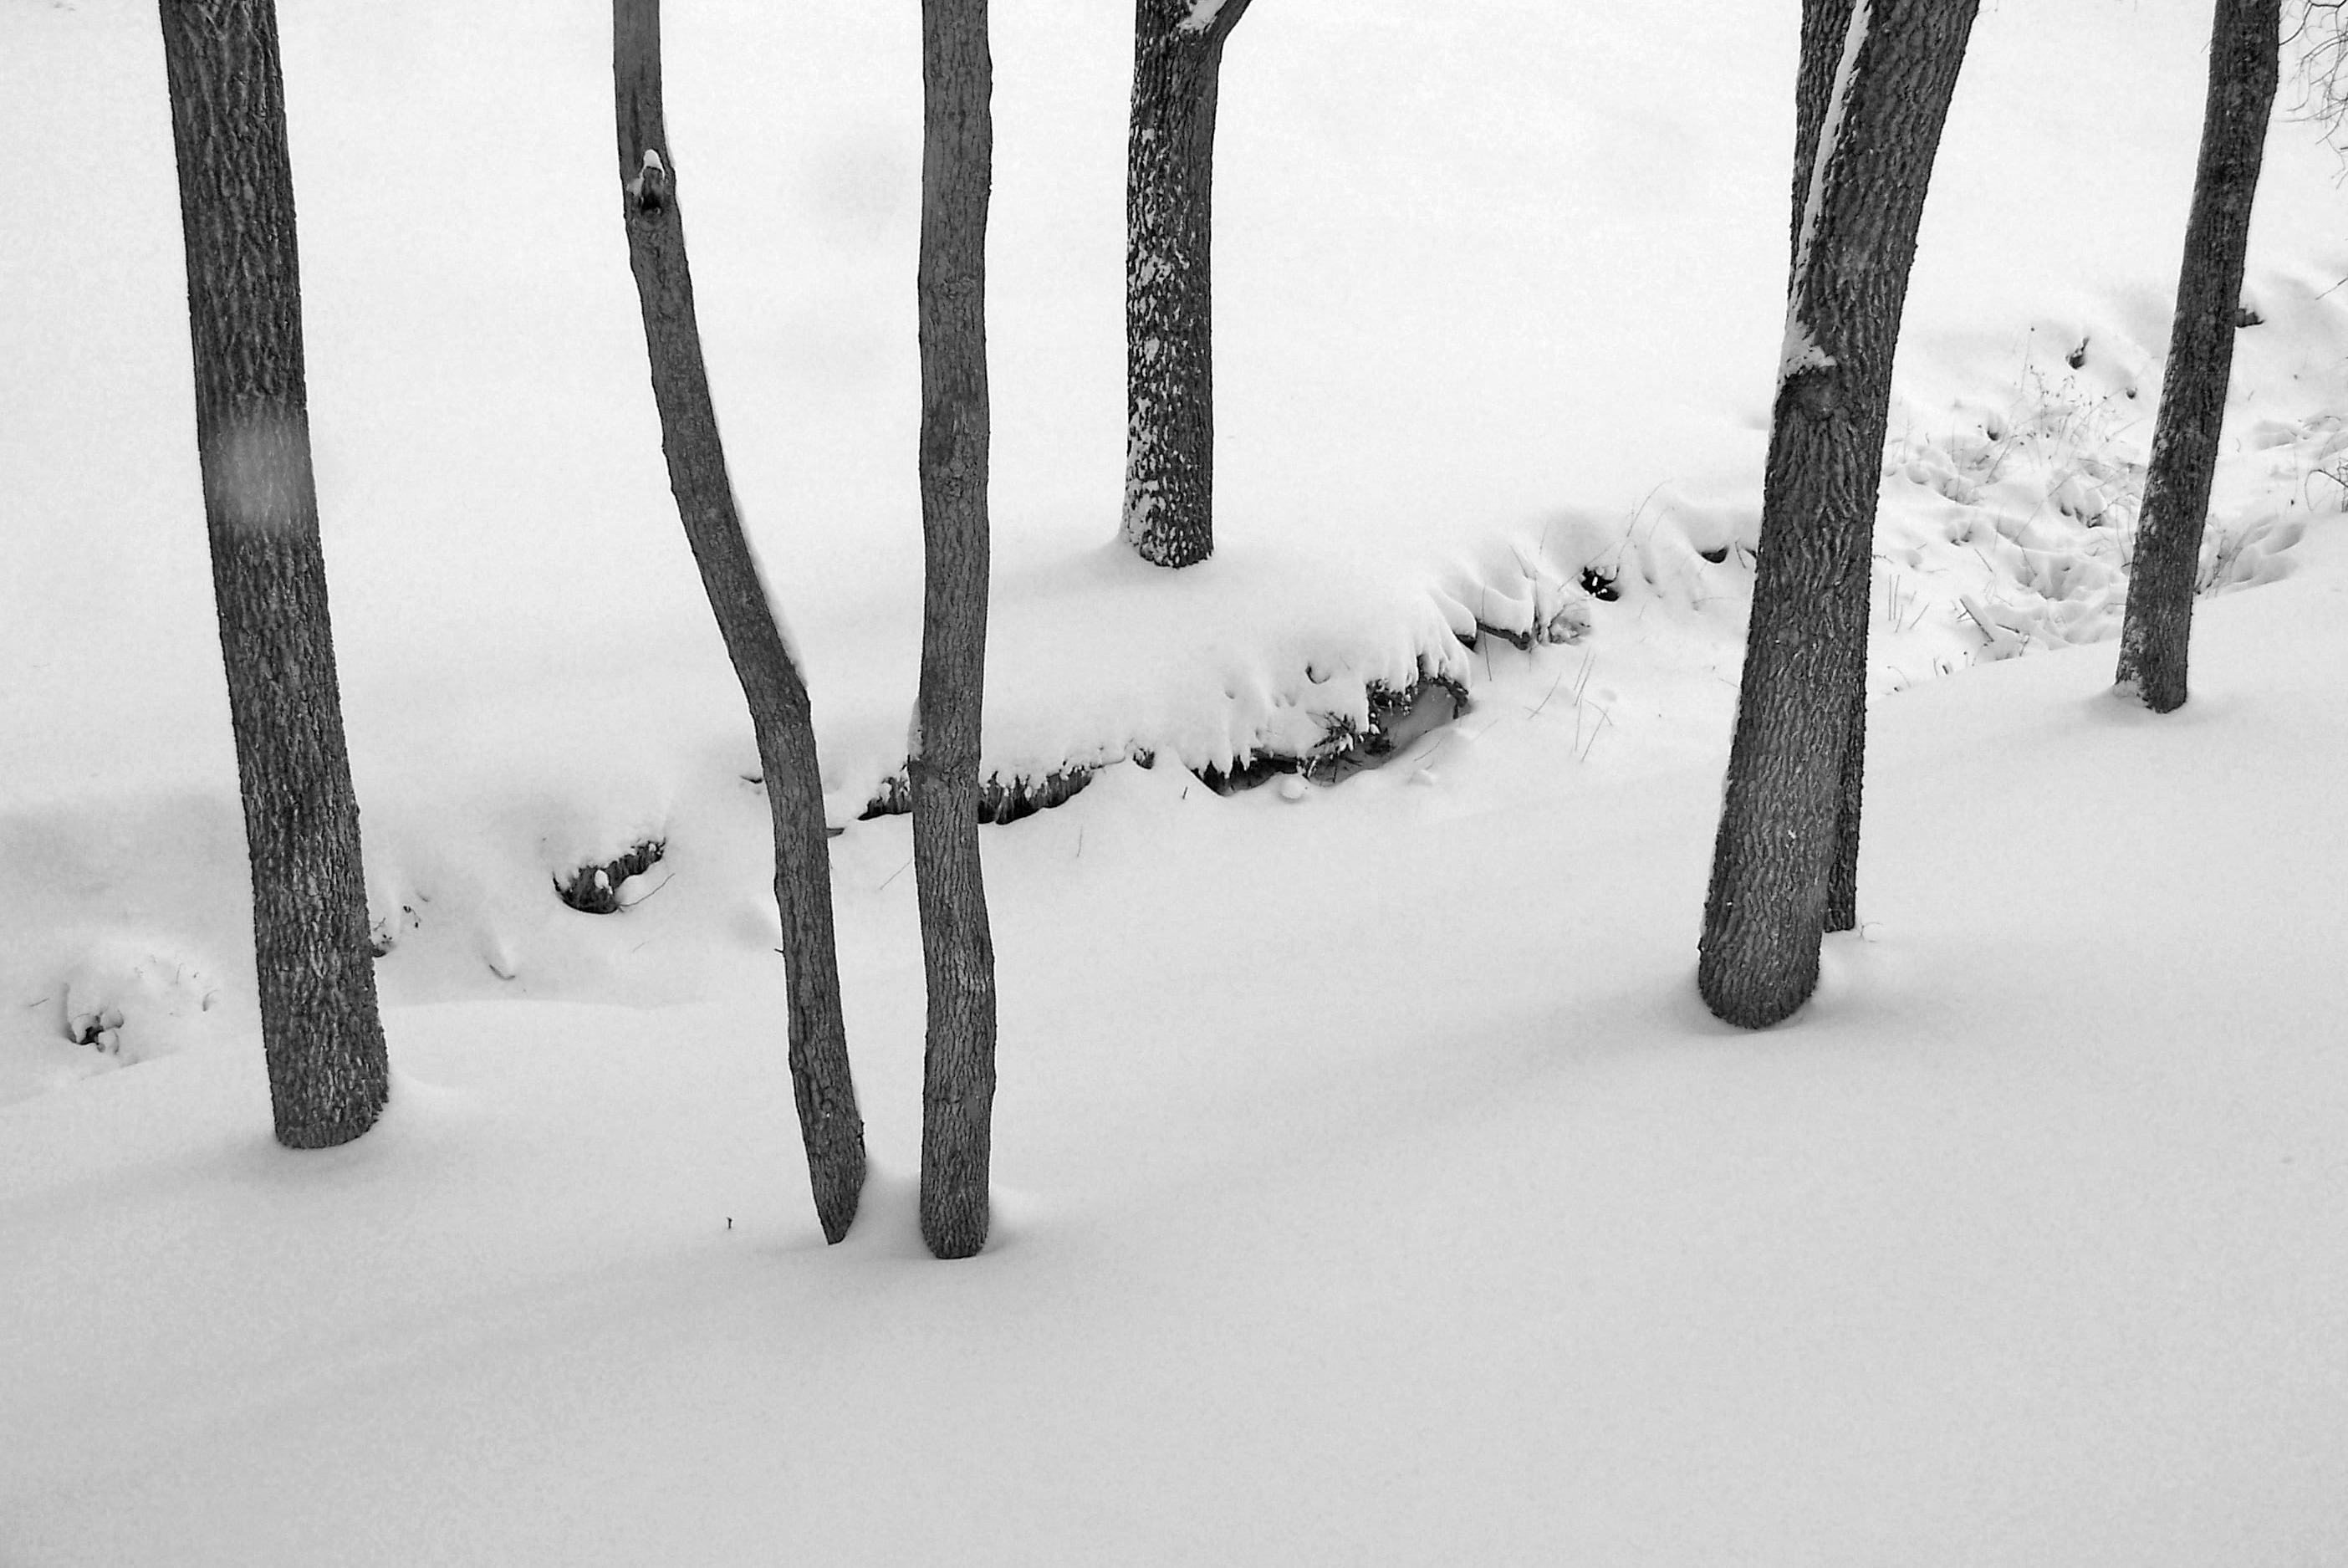 black trees and snow covered ground